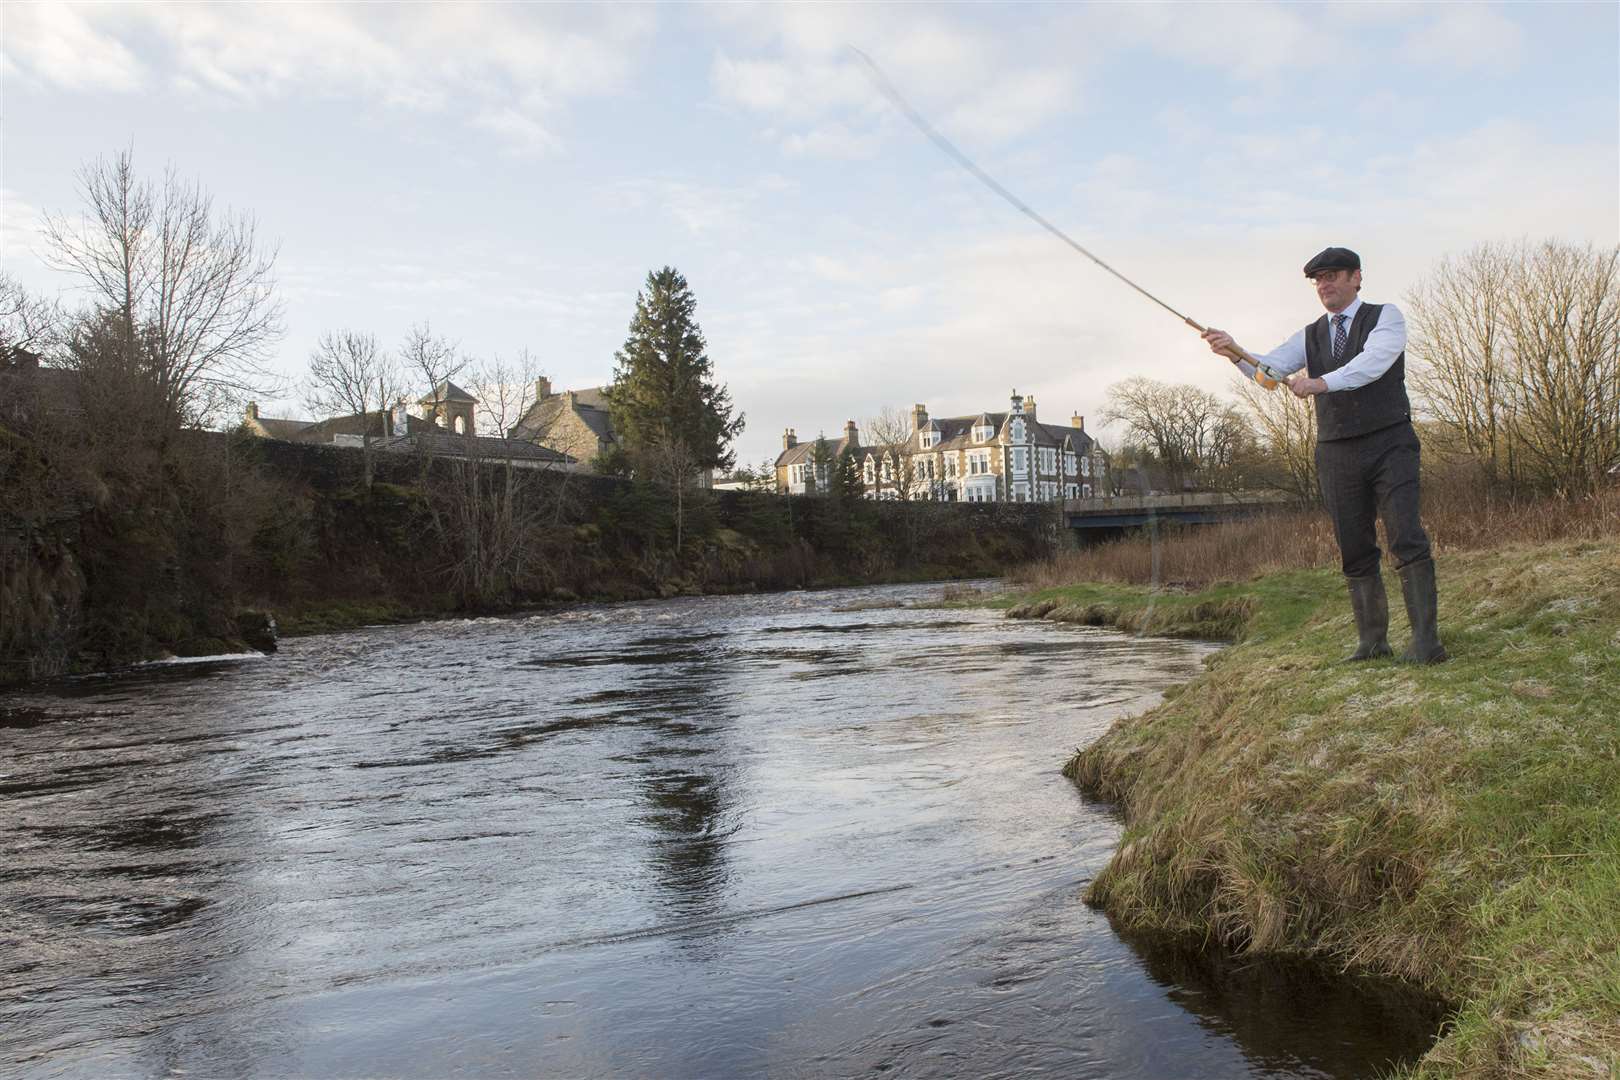 Richard Medley from Thirsk, North Yorkshire, makes the first cast to officially open the 2022 salmon season on the River Thurso. Picture: Robert MacDonald / Northern Studios